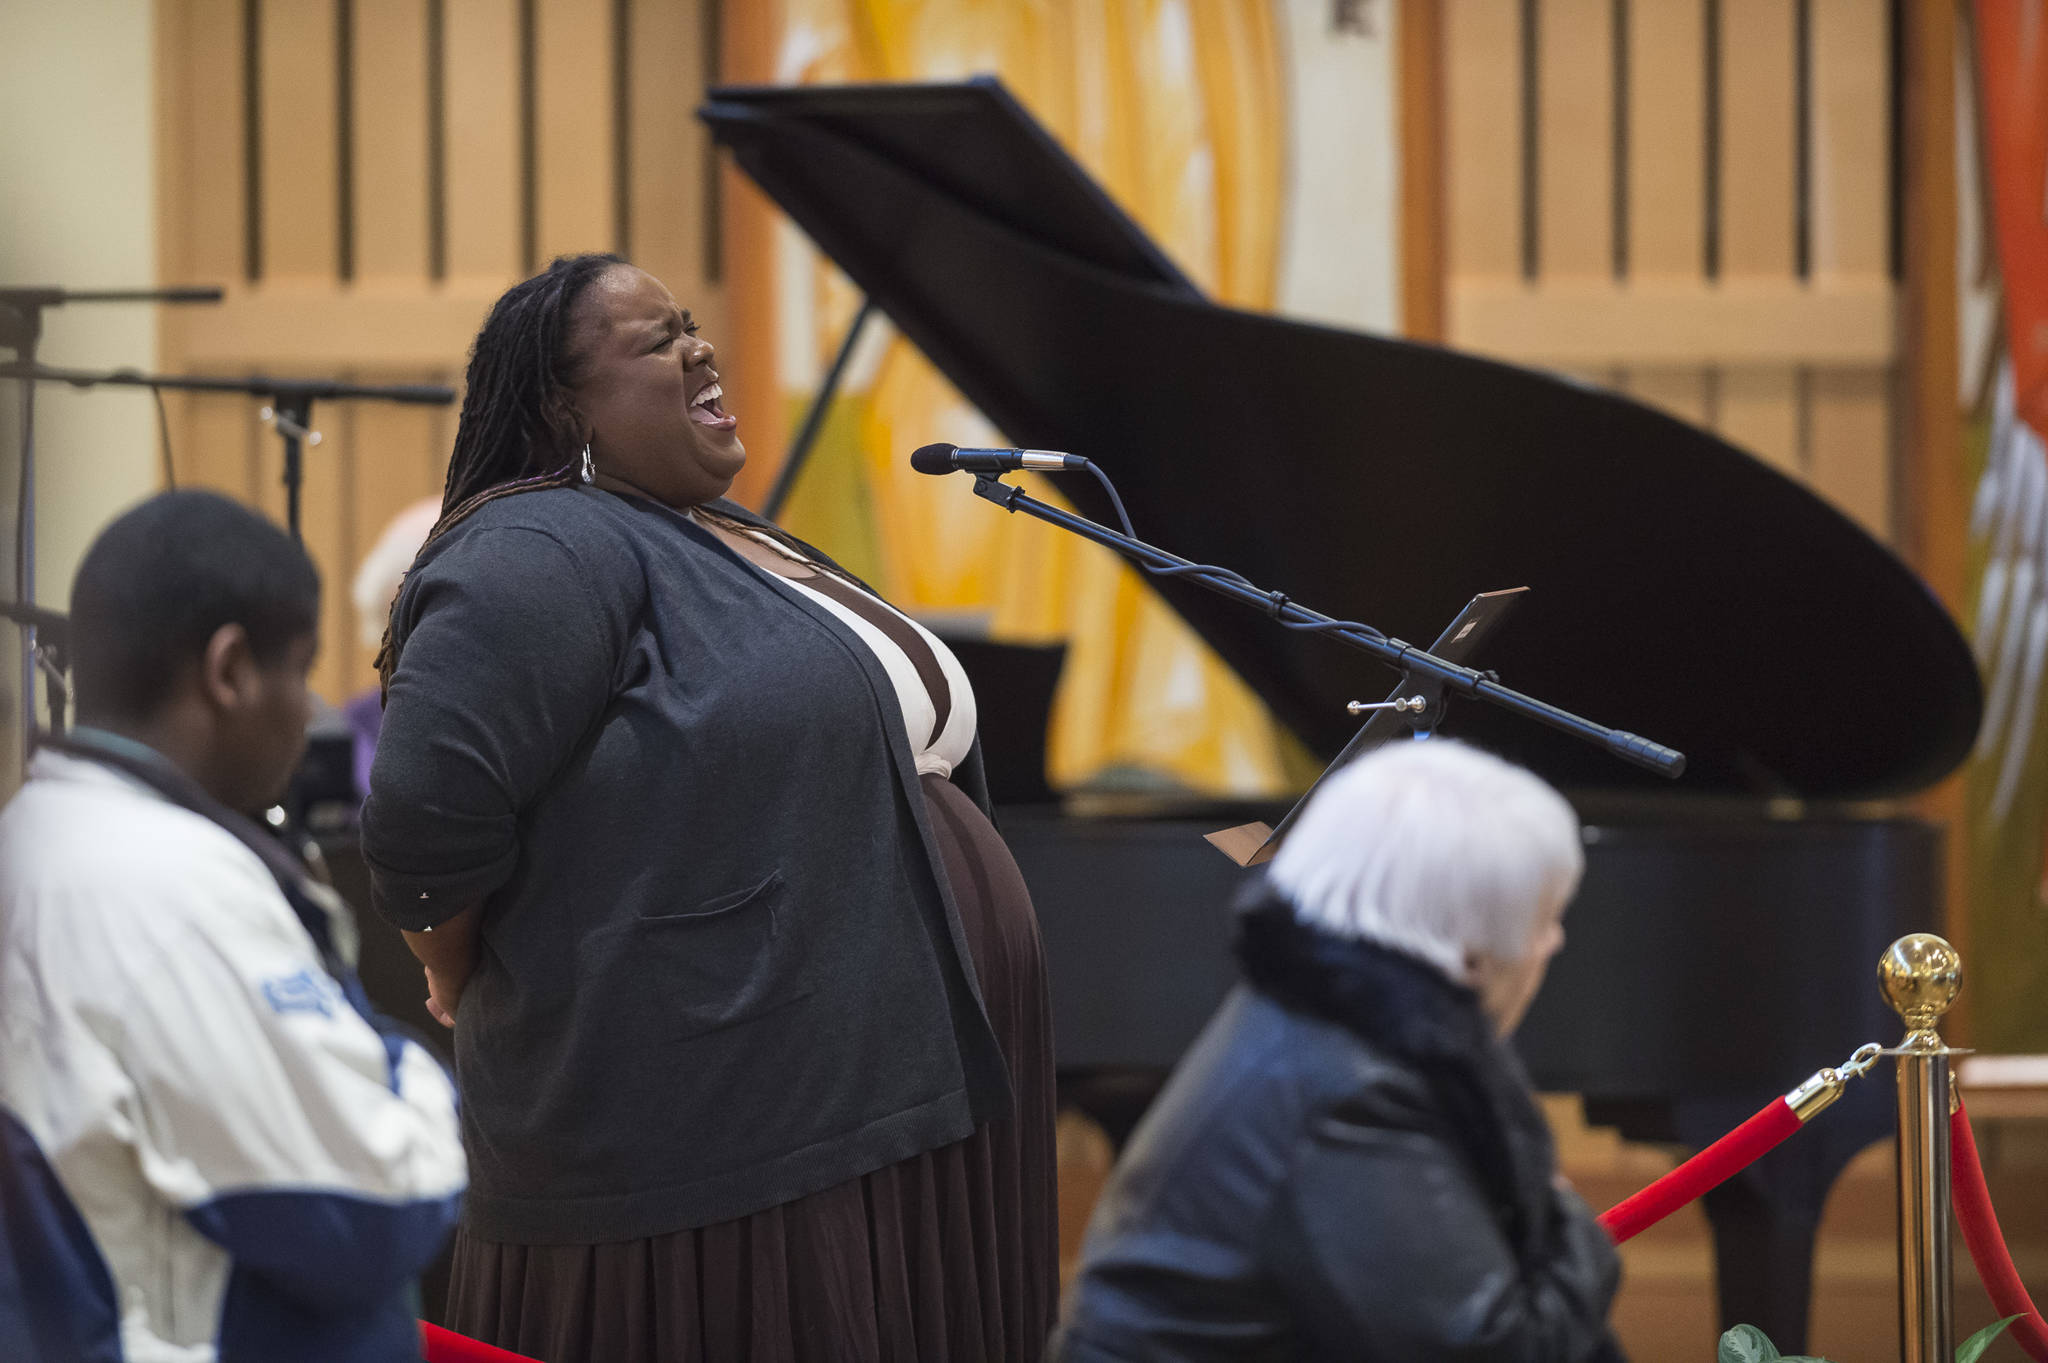 Jocelyn Miles sings the National Anthem at the Dr. Martin Luther King Jr. 2019 Community Celebration at St. Paul’s Catholic Church on Monday, Jan. 21, 2019. (Michael Penn | Juneau Empire)